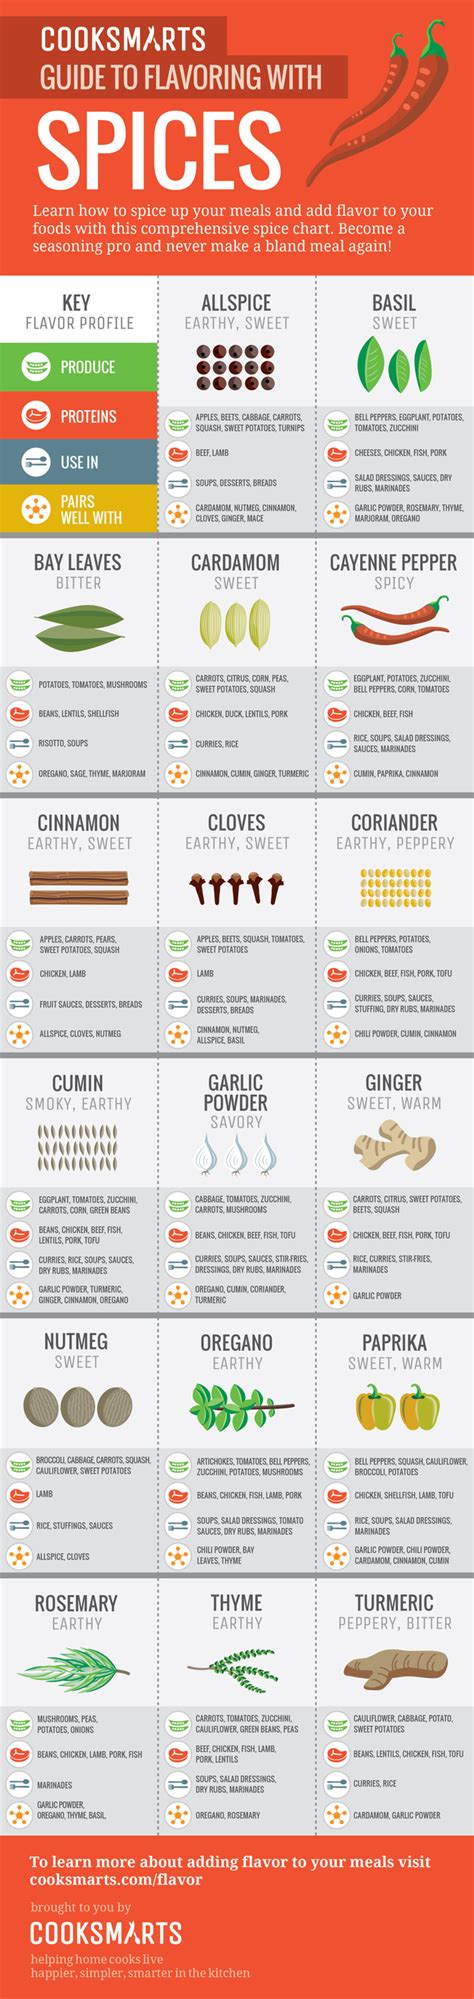 Guide To Cooking With Spices Pictures Photos And Images For Facebook